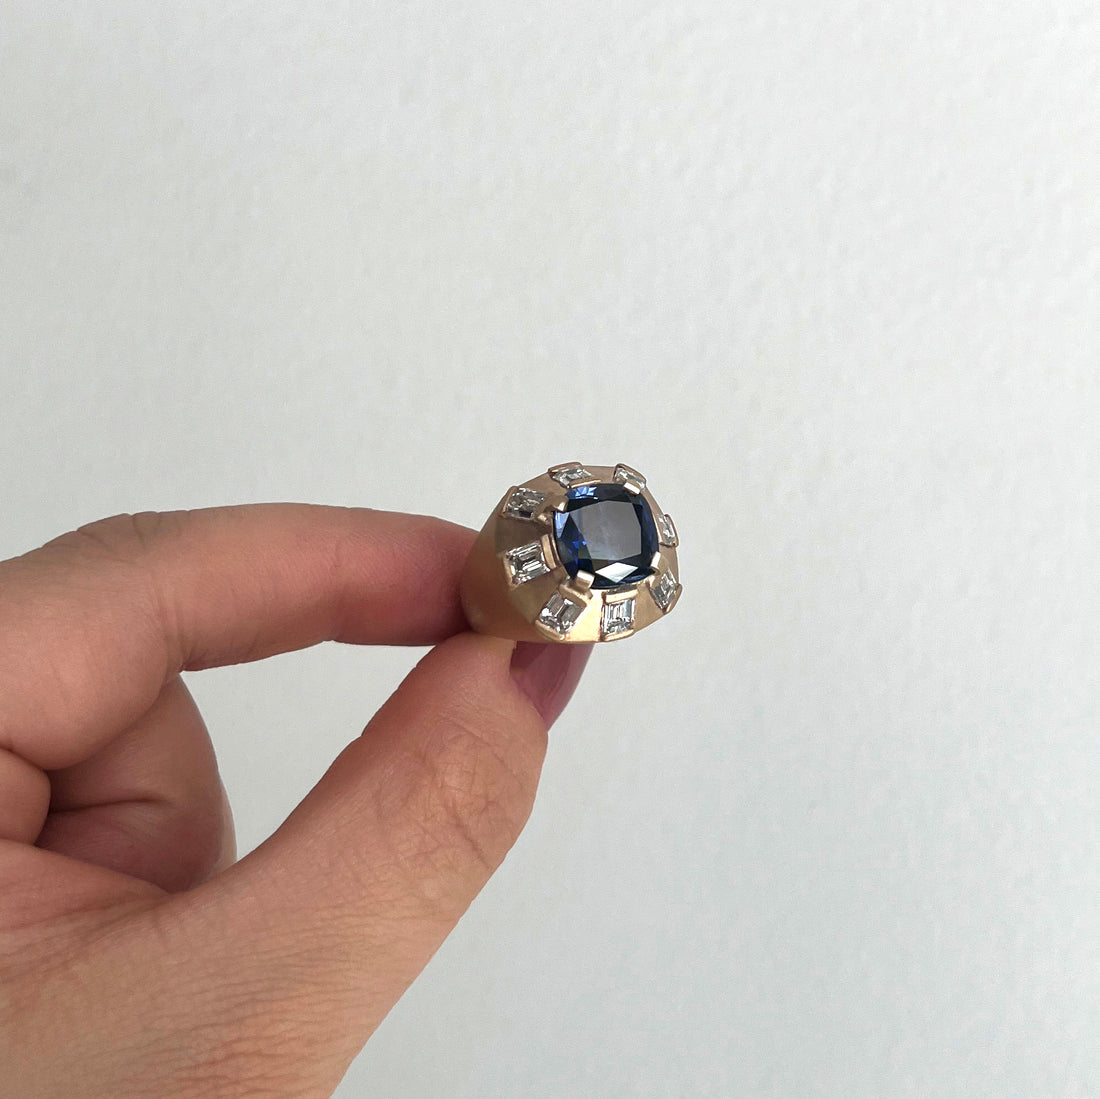 The process behind the making: featuring our most recent sapphire bespoke ring